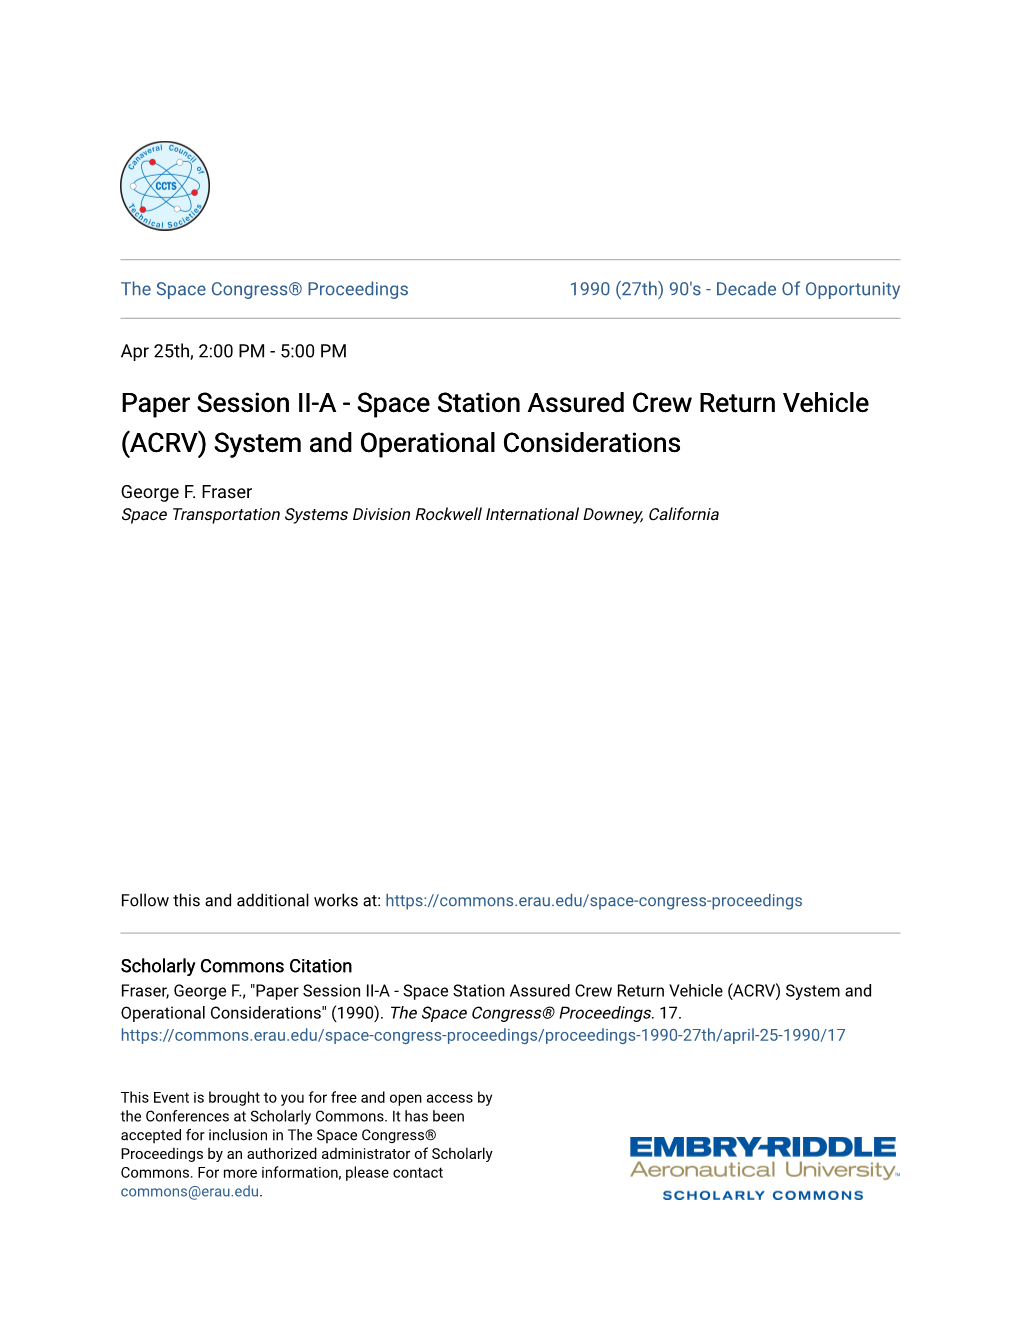 Paper Session II-A - Space Station Assured Crew Return Vehicle (ACRV) System and Operational Considerations